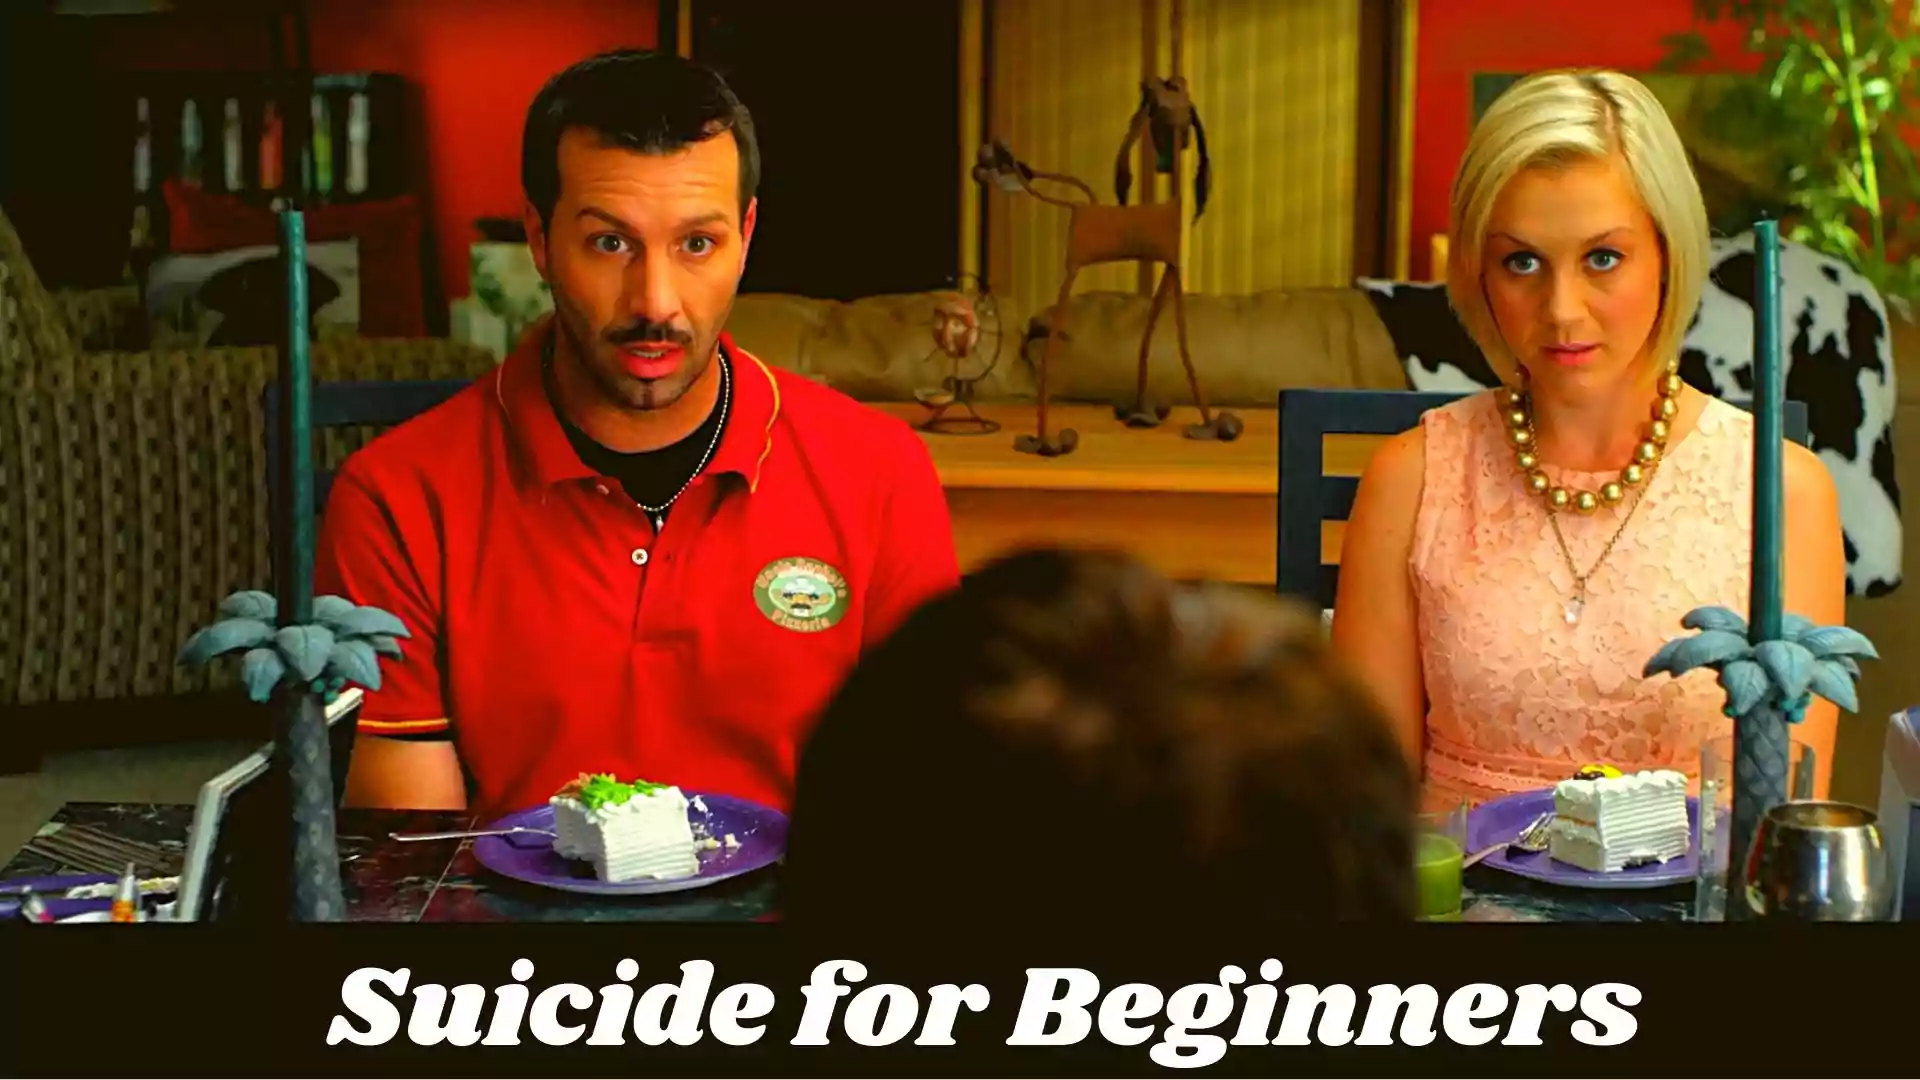 Suicide for Beginners Wallpaper and Image